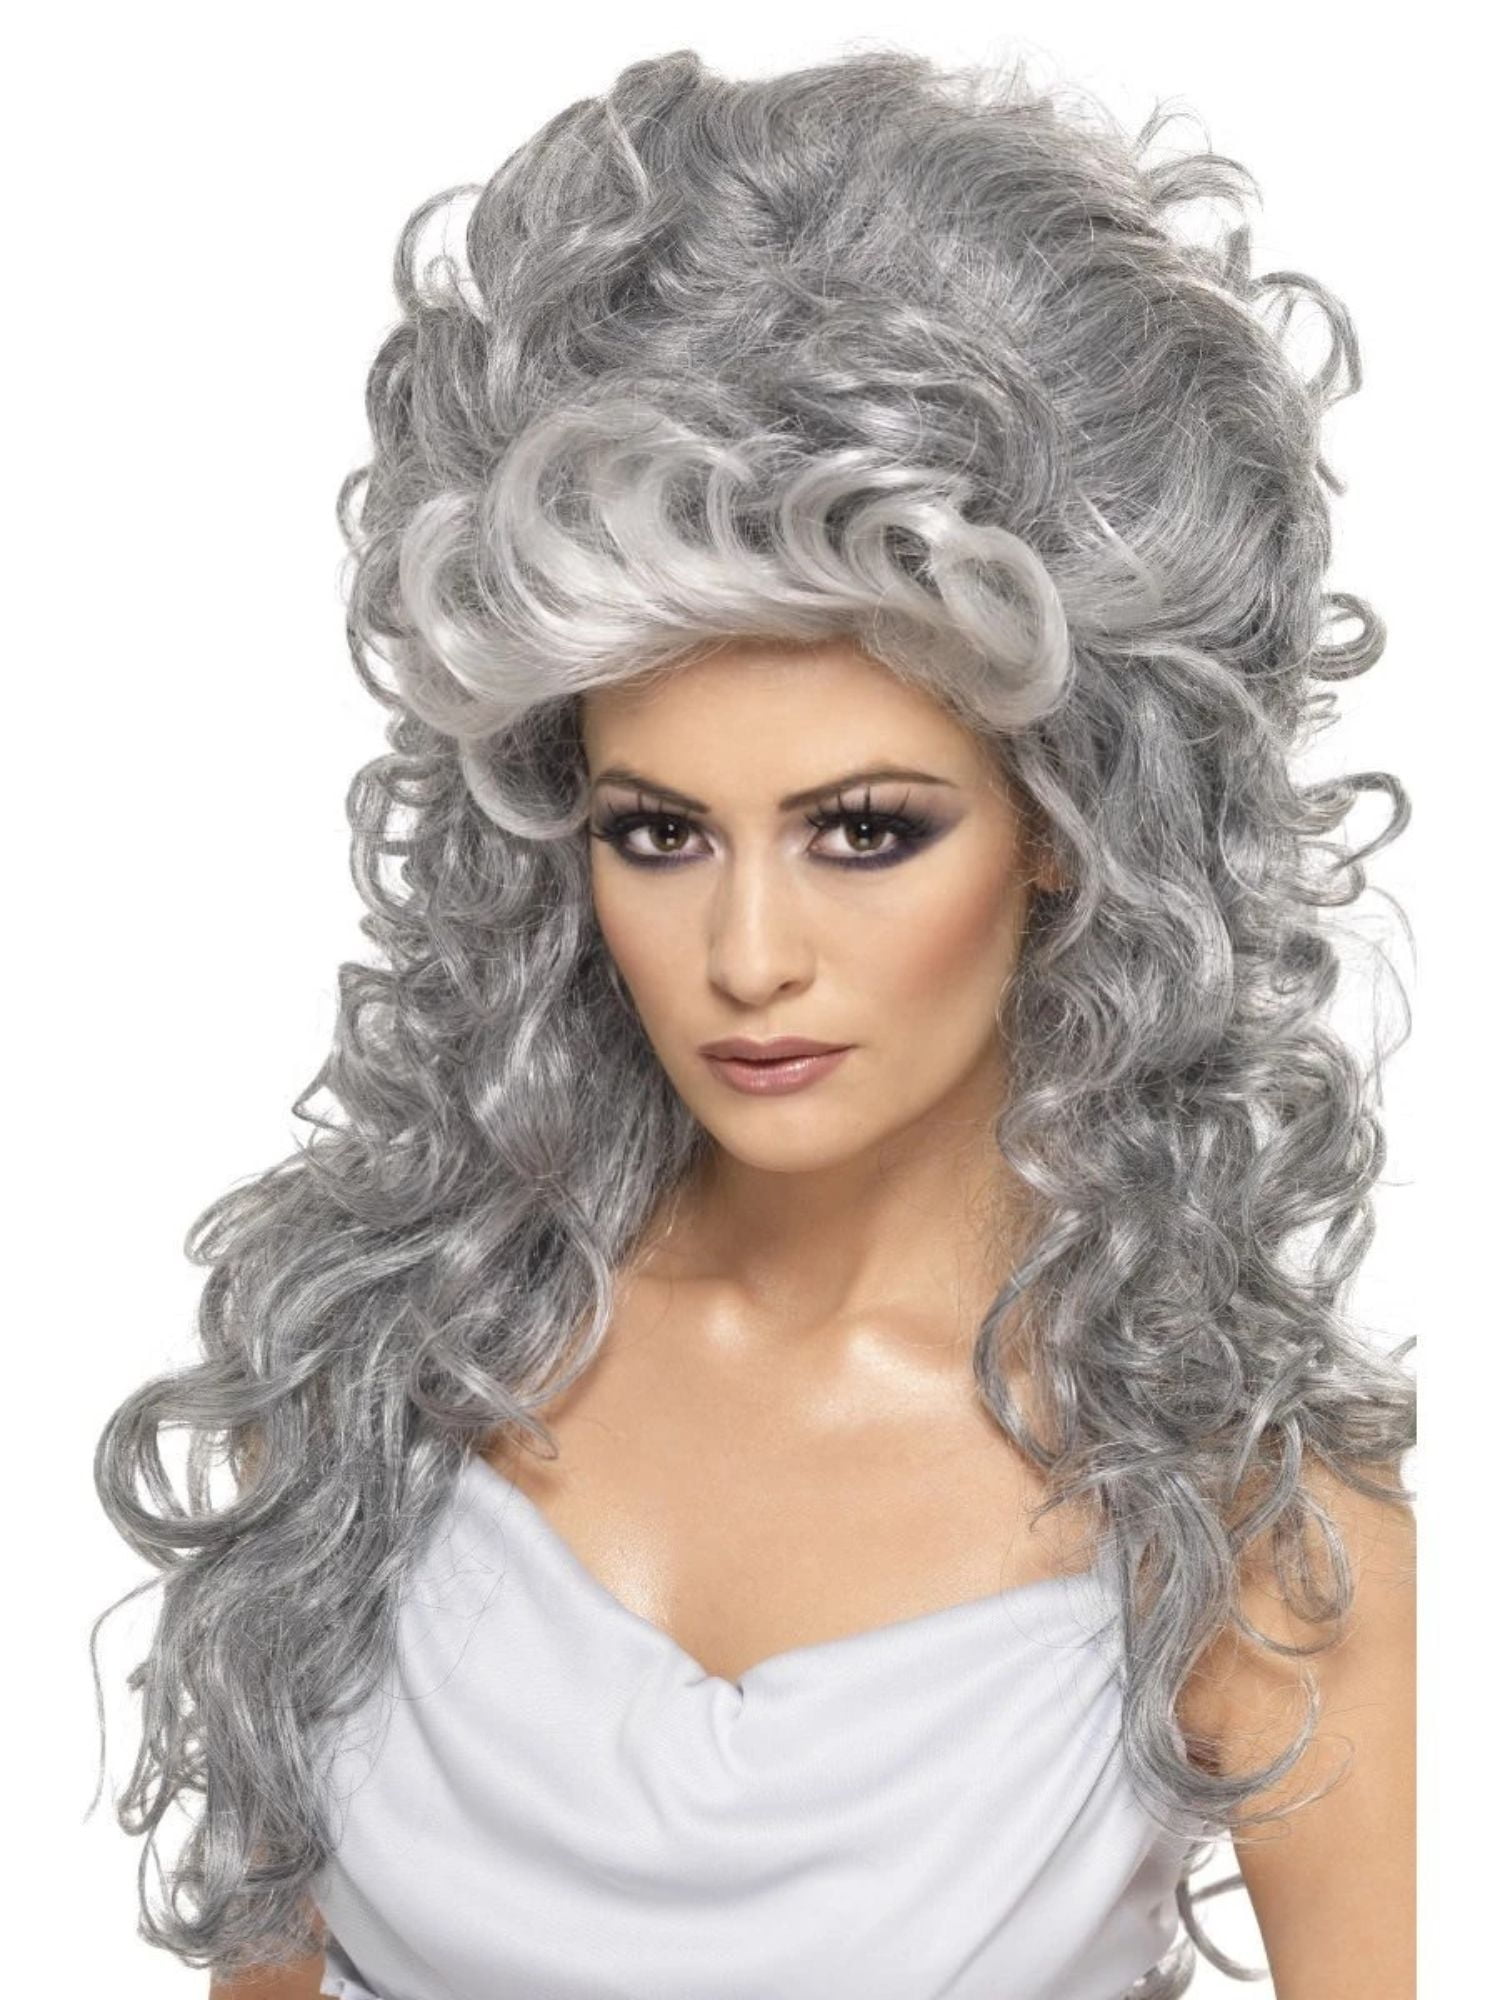 Silver Witch Wig Ladies Halloween Fancy Dress Womens Adult Costume Accessory Wig 